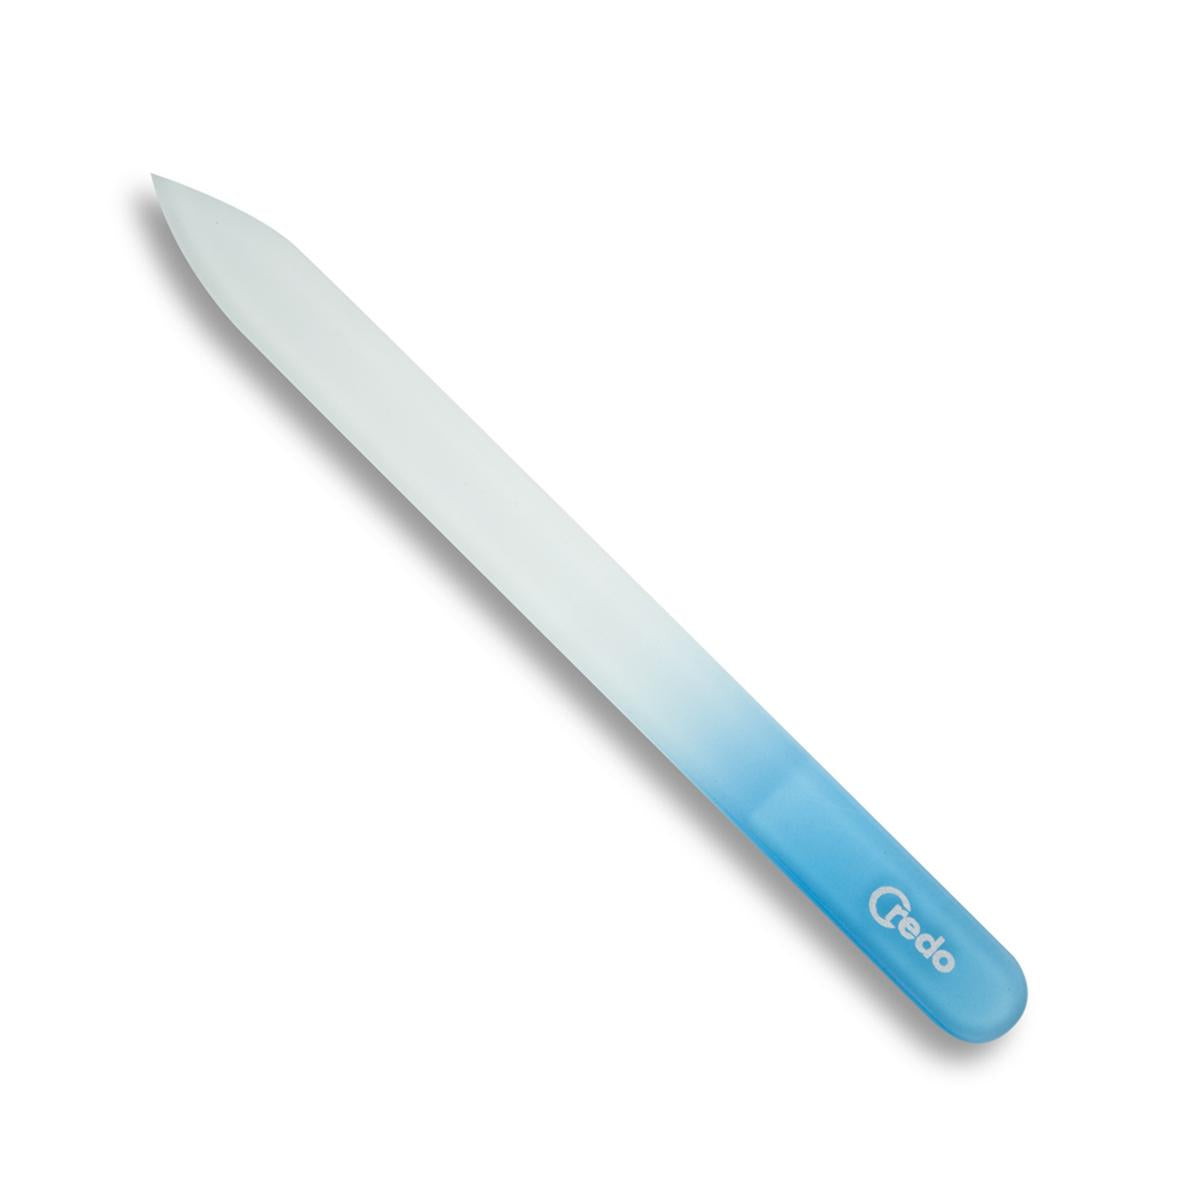 Primary image of Blue Glass Nail File